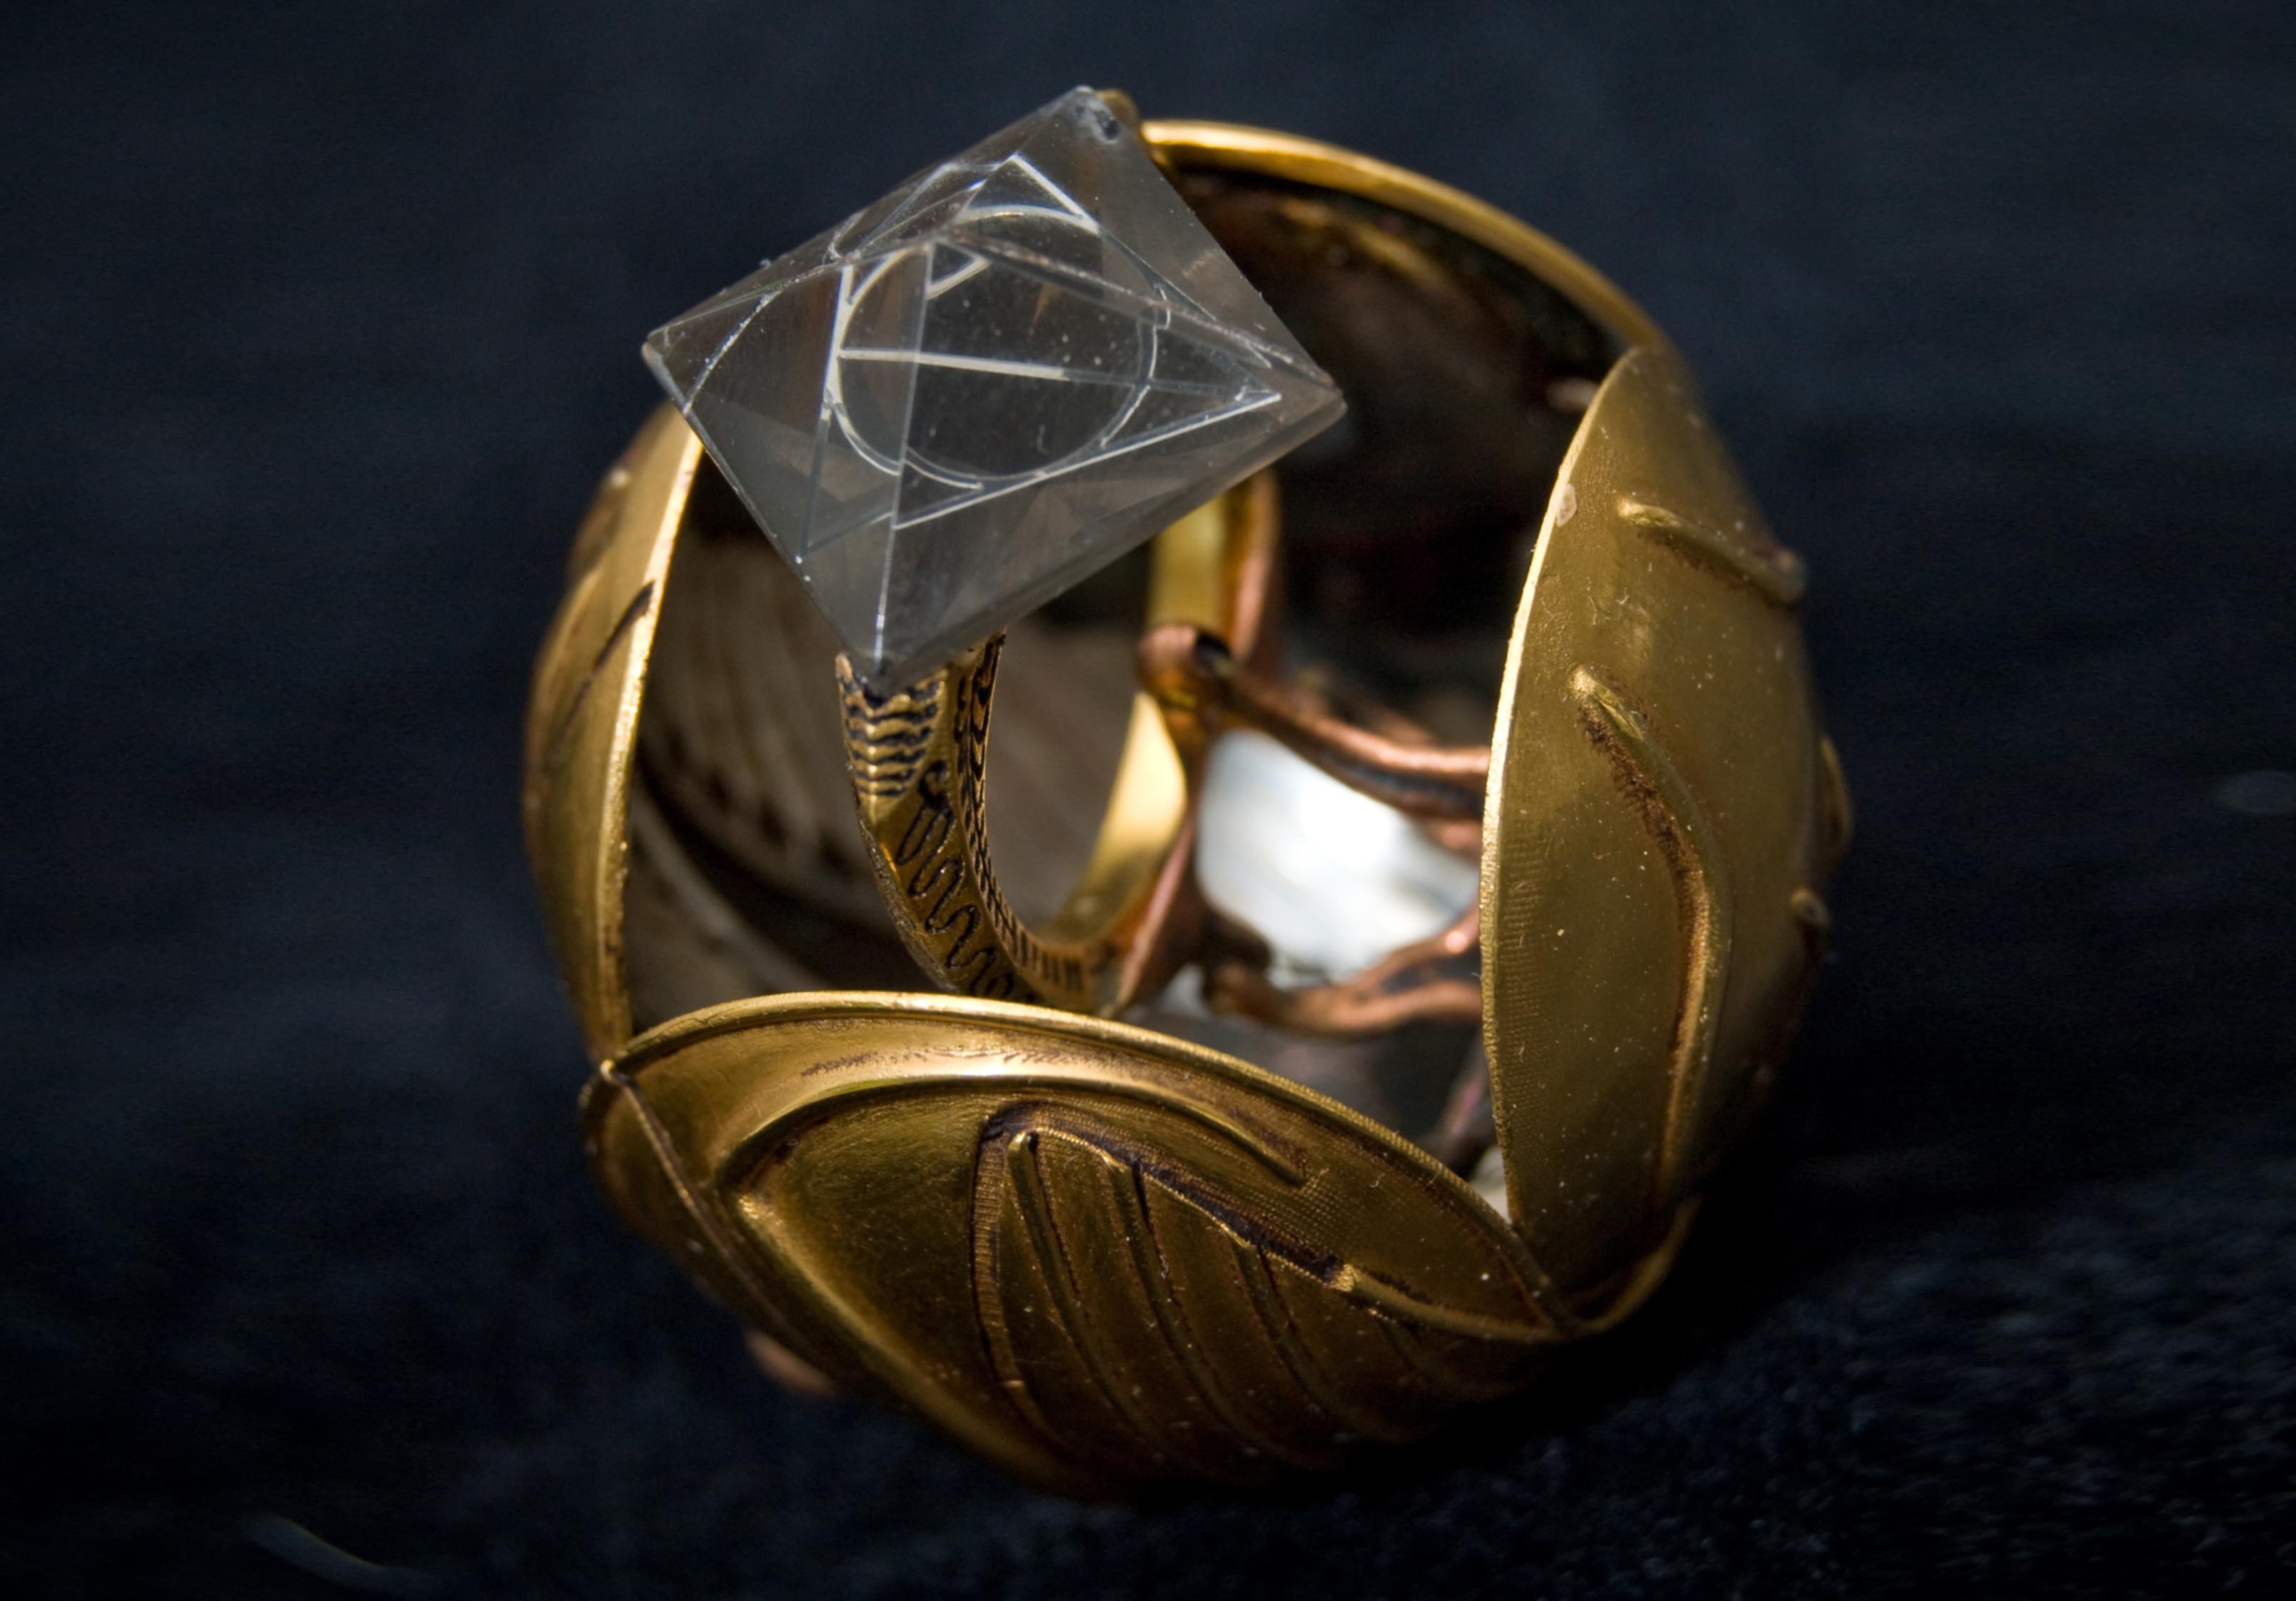 How to Make a Golden Snitch from Harry Potter